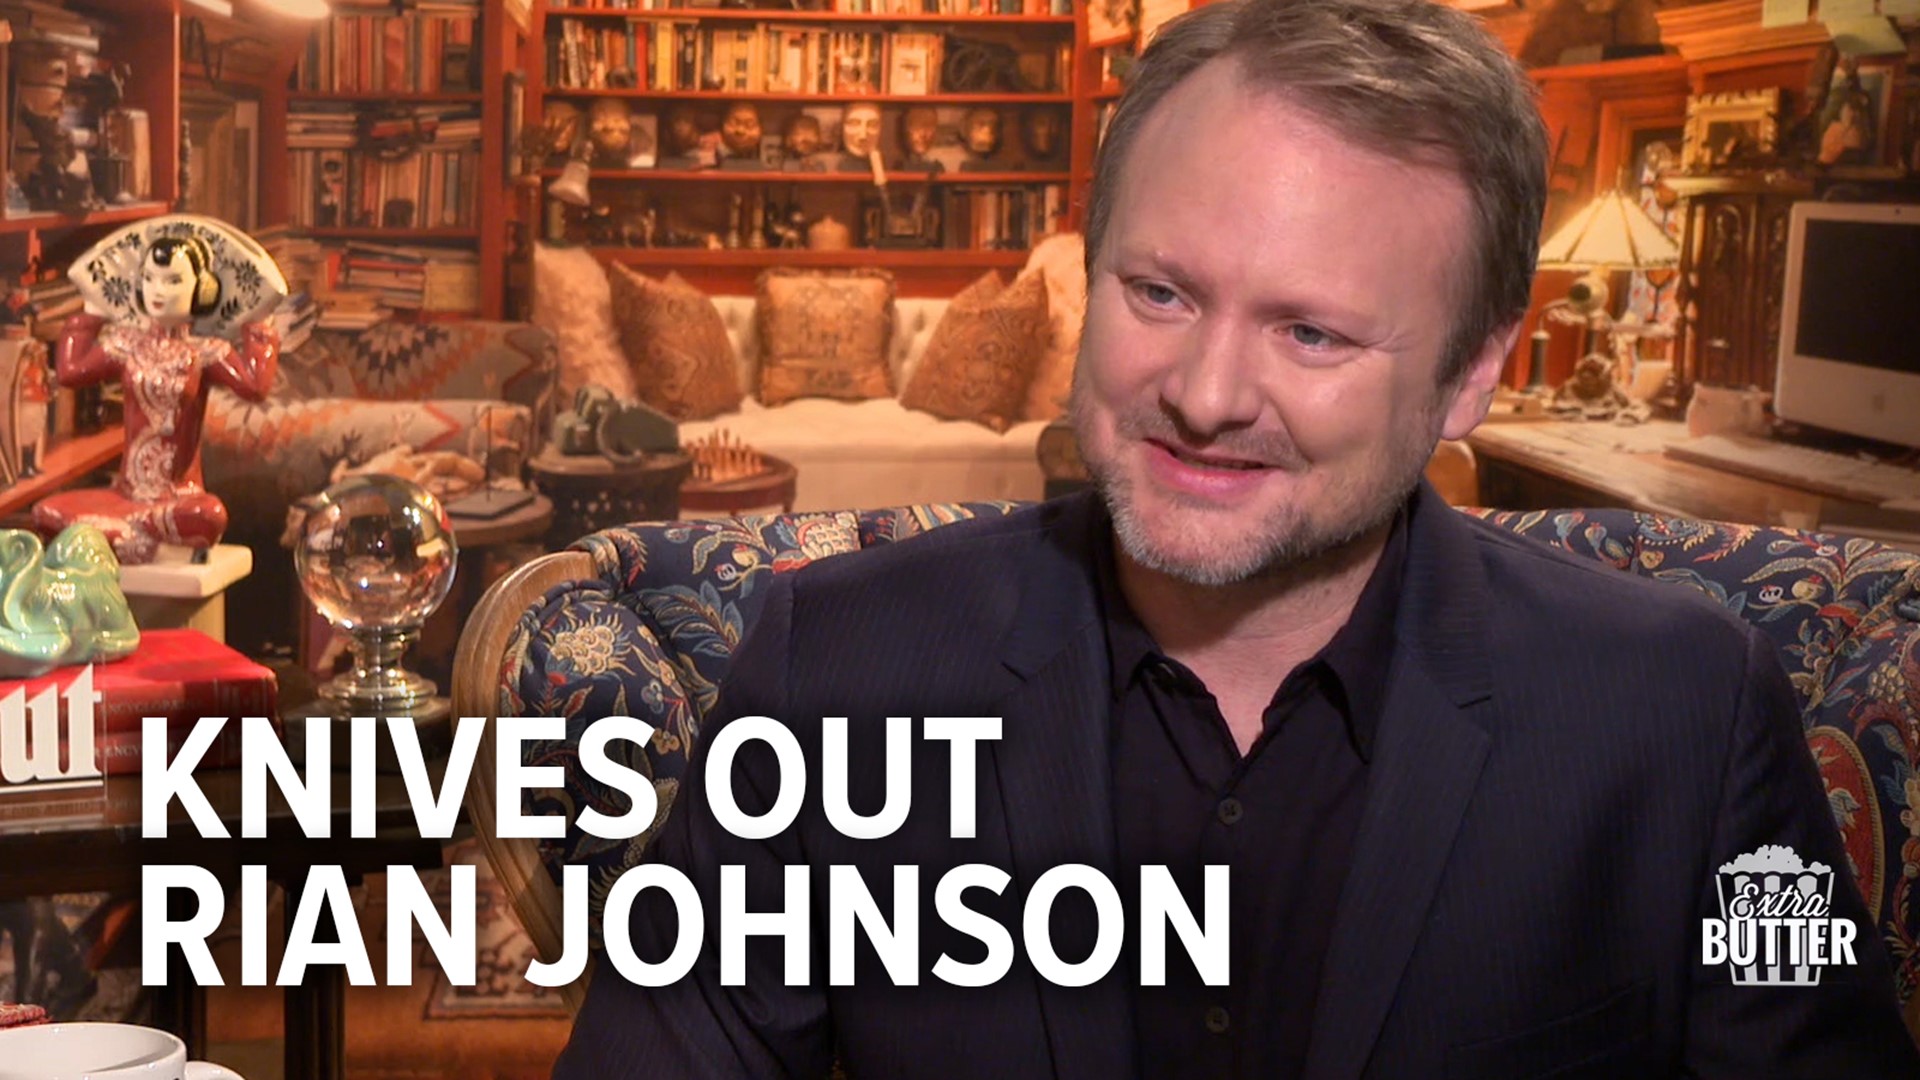 Rian Johnson talks about his all-star cast in the movie 'Knives Out.' Rian tells Mark S. Allen he loved making this movie and would love to make another one.